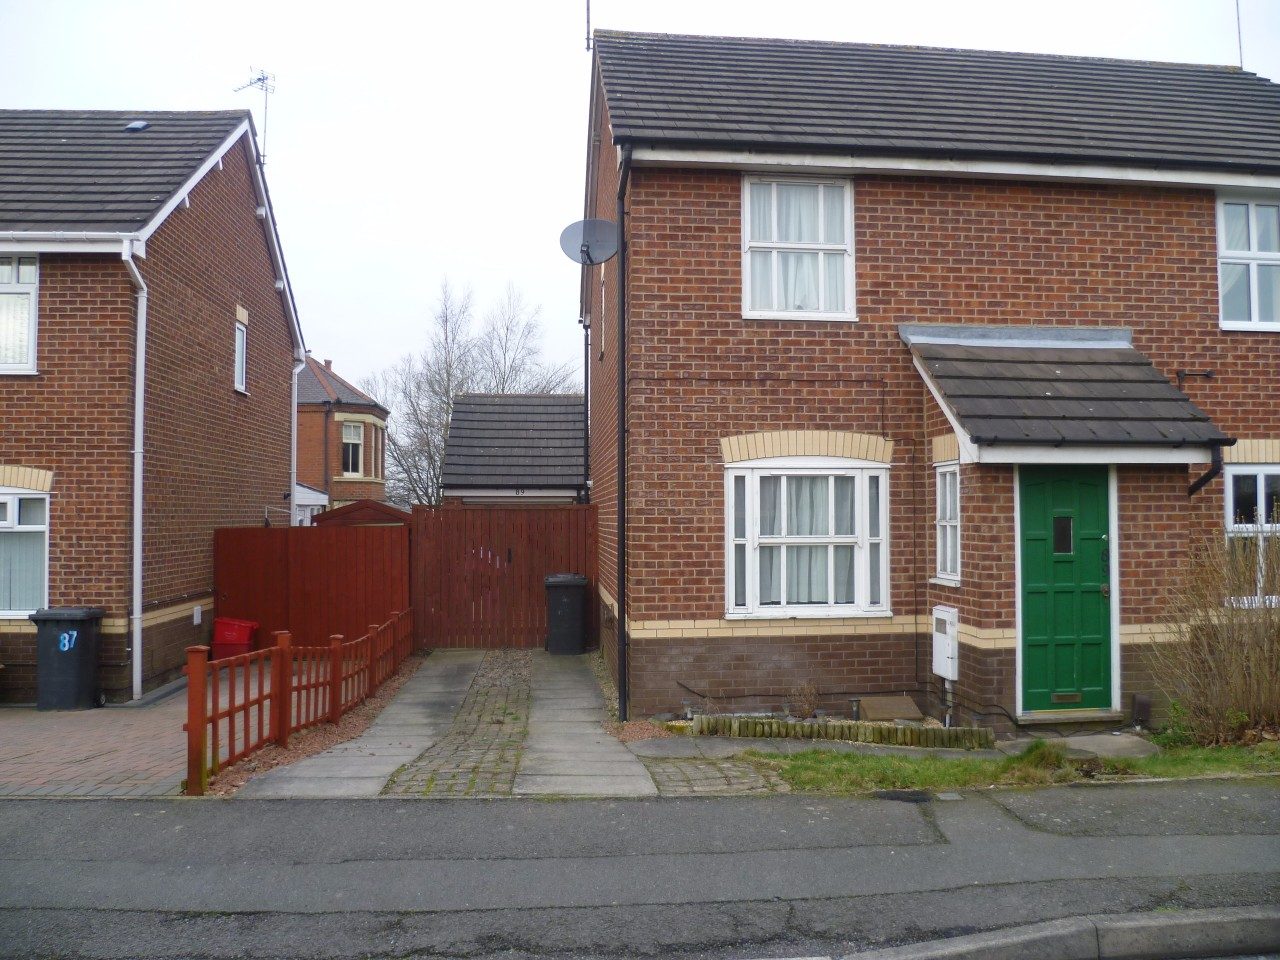 2 Bedroom Semi Detached House with Garage to Rent in 